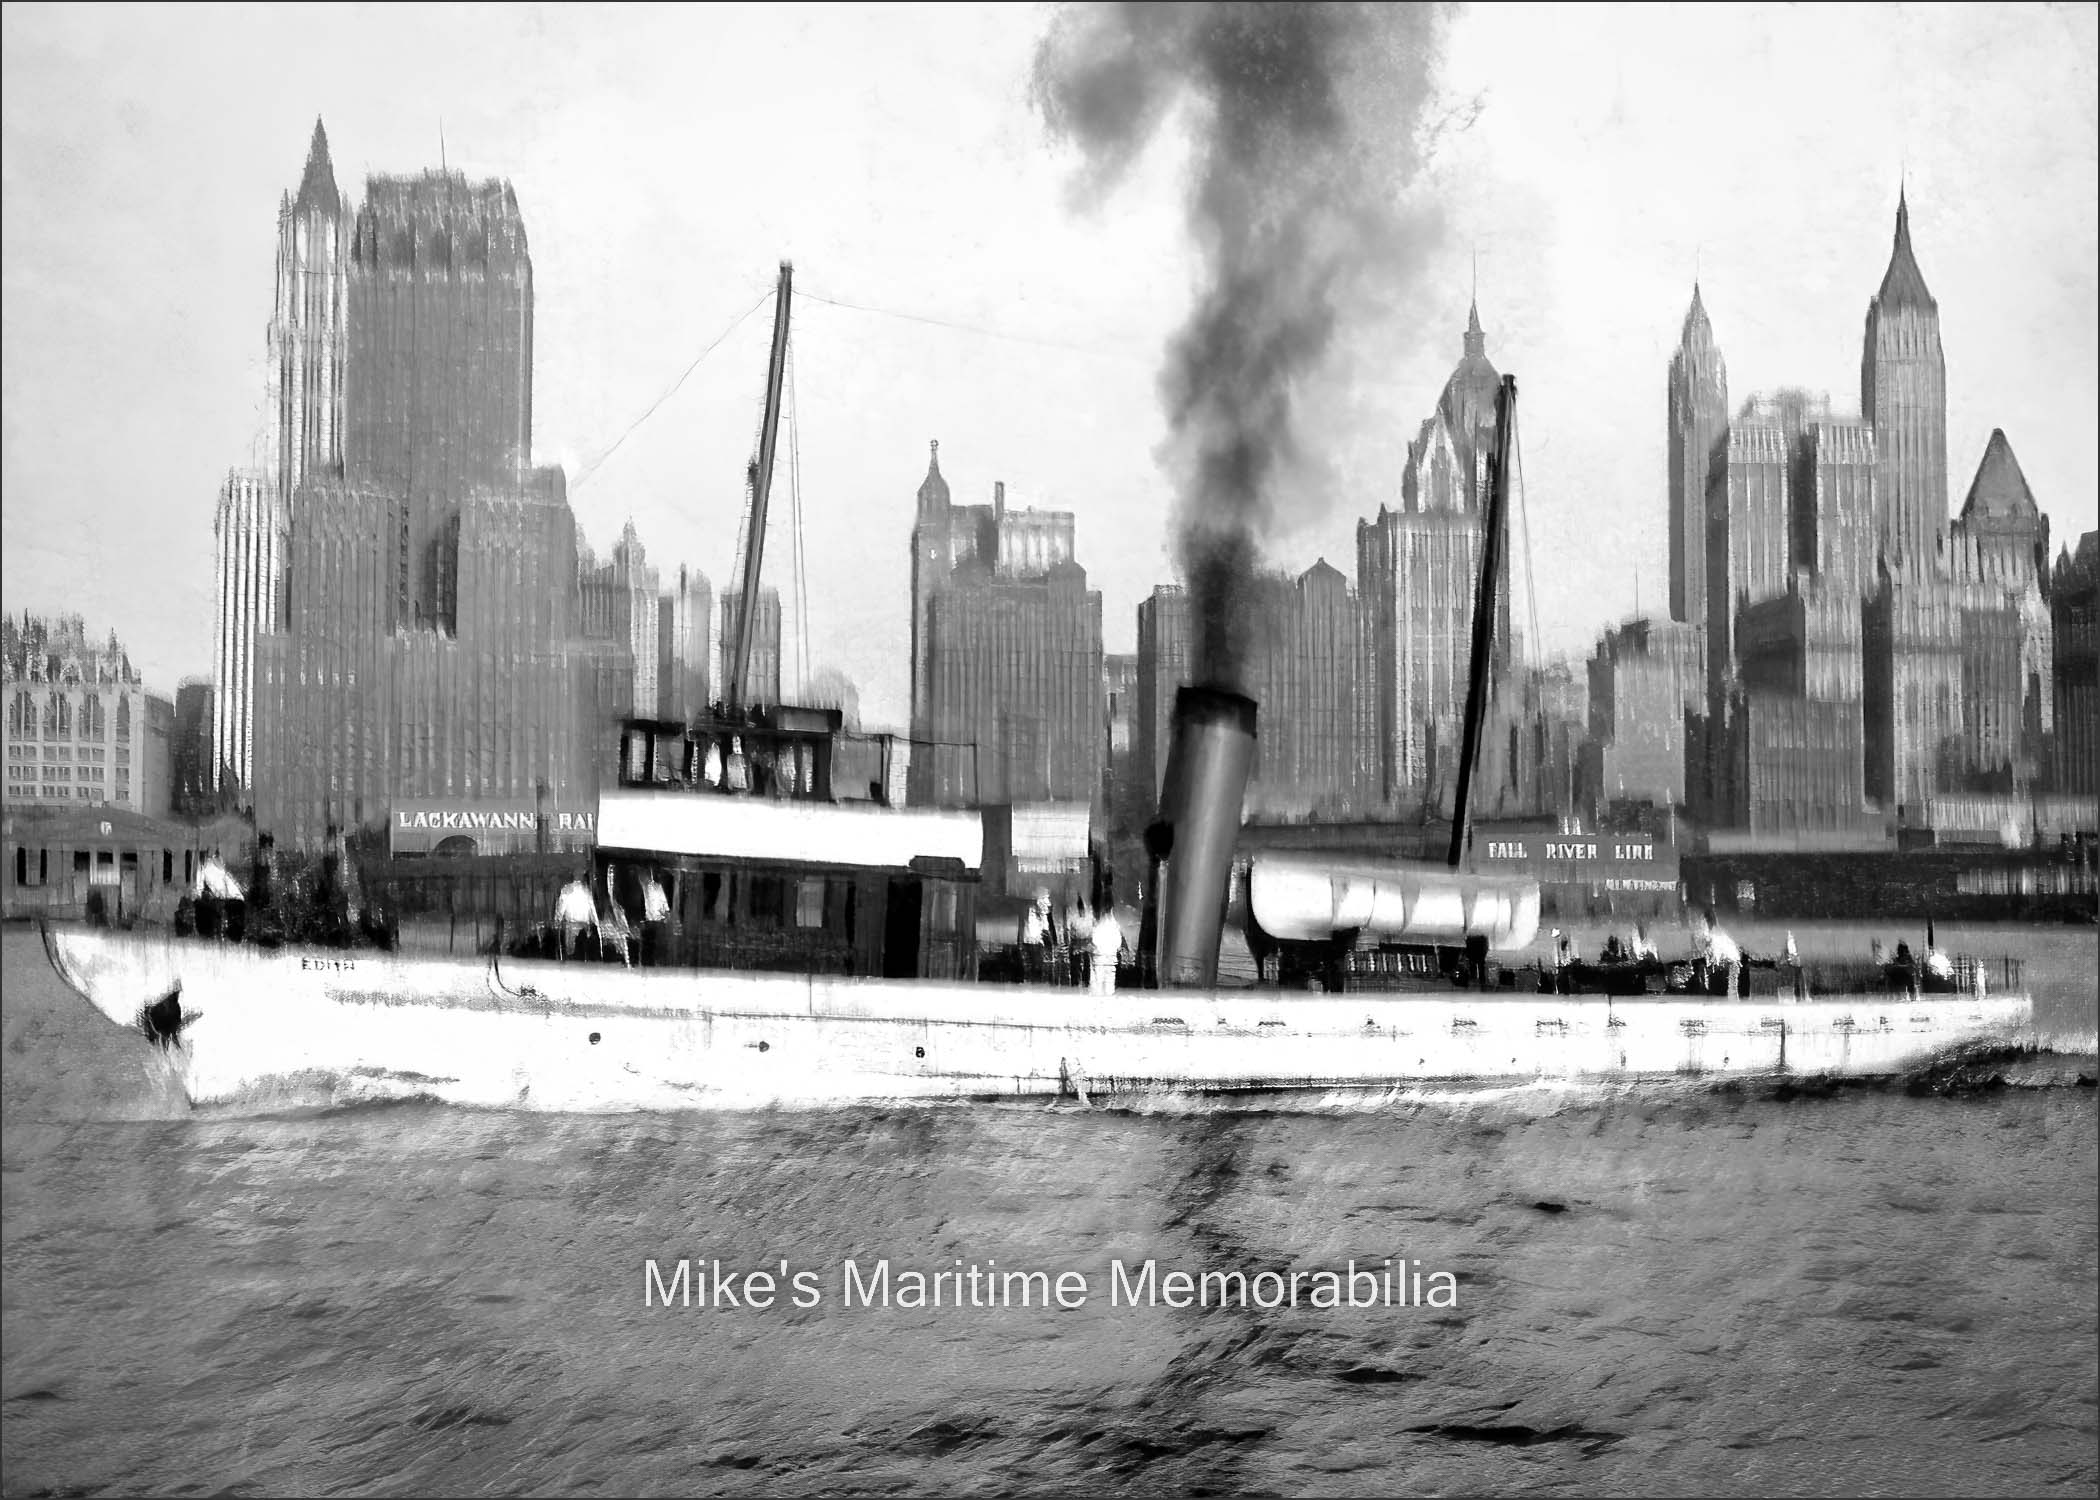 EDITH, Hoboken, NJ – 1932 Captain William Baletti's "EDITH" returning to her pier at Hoboken, NJ circa 1932. In the background is the Manhattan skyline off West 14th Street. The boat was built in 1902 at Boston, MA as the steam yacht "SATILLA". In May 1917, the US Navy acquired her for service during World War I and named her the "USS SATILLA" with the hull designation of "SP 687". Assigned to coastal patrol duty along the Maine coast during World War I, she returned to civilian operation in 1920 when Oscar Ledberg of Providence, RI purchased the boat and renamed her "EDITH". In 1927, Captain William Baletti purchased the "EDITH" and she began making fishing trips from the 15th Street Pier at Hoboken, NJ. Captain Baletti also picked up additional anglers at Battery Park, NY before heading to the fishing grounds. The photo is courtesy of Phil Castellano.